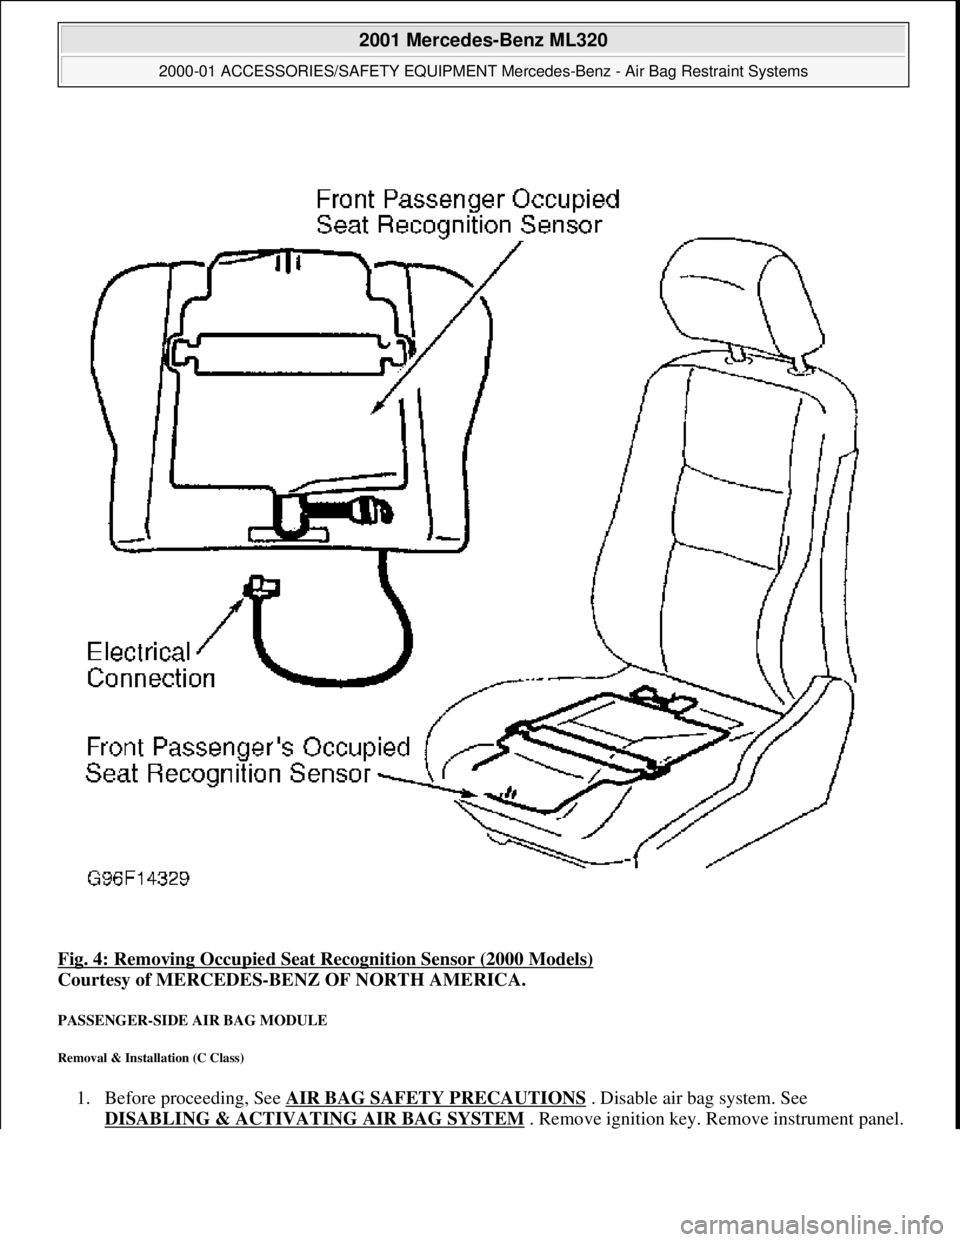 MERCEDES-BENZ ML500 1997  Complete Owners Manual Fig. 4: Removing Occupied Seat  Recognition Sensor (2000 Models)  
Courtesy of MERCEDES-BENZ OF NORTH AMERICA.   
PASSENGER-SIDE AIR BAG MODULE 
Removal & Installation (C Class) 
1. Before proceeding,